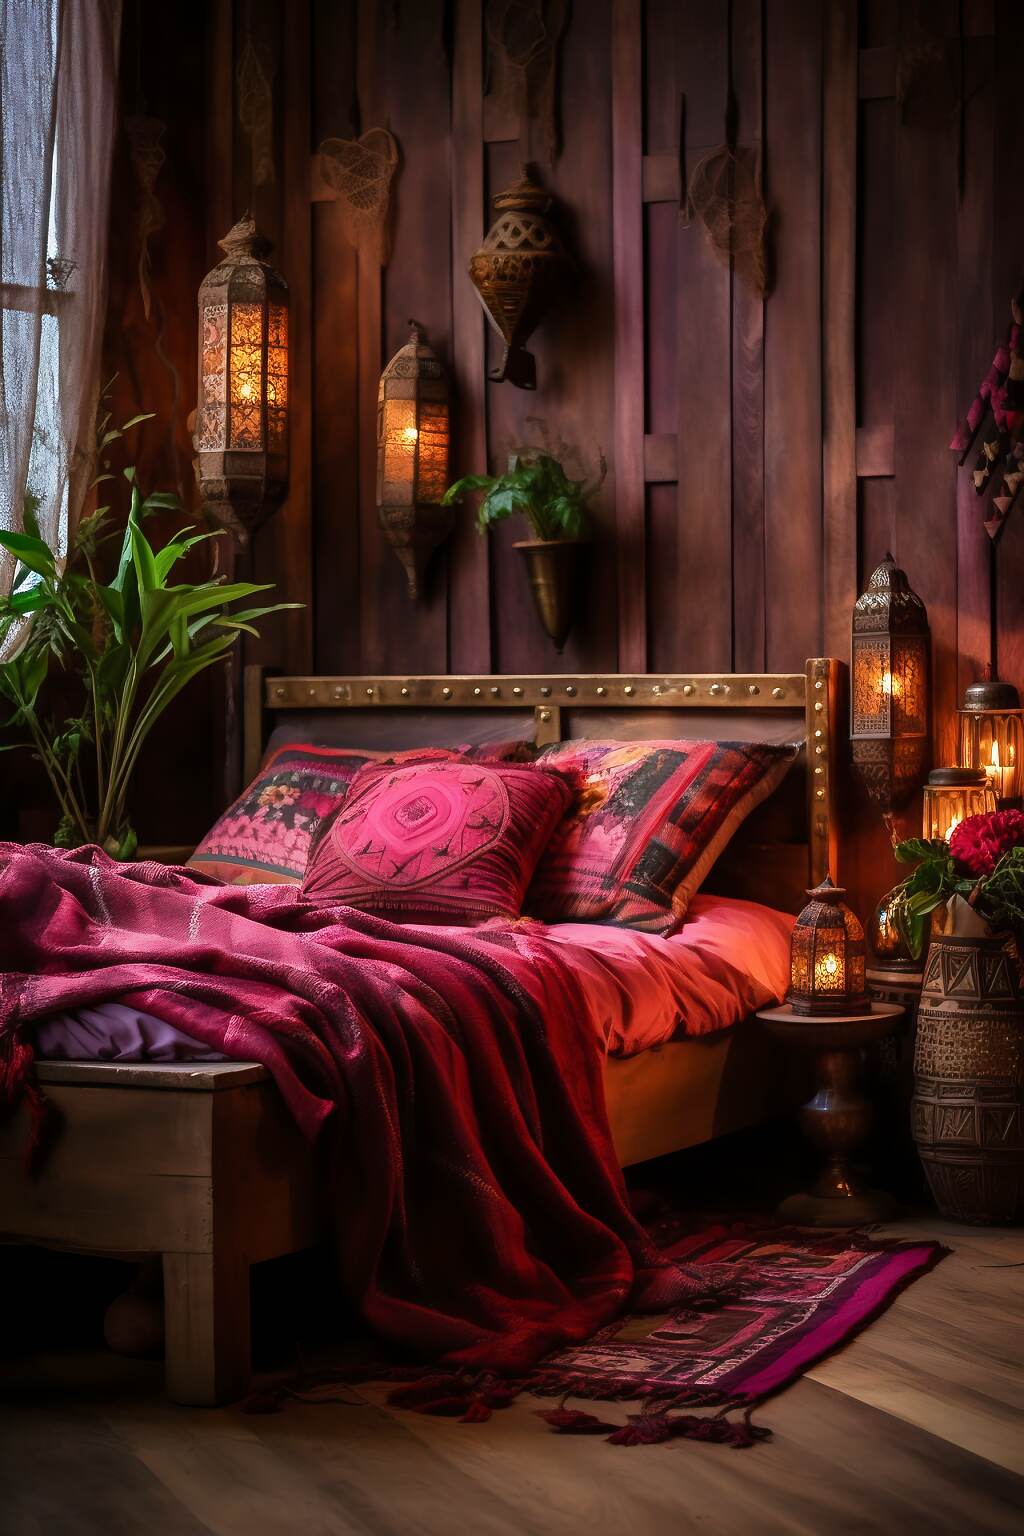 Compact Dark Boho Bedroom With A Red &Amp; Grey Color Scheme, Featuring Patchwork Quilts, Distressed Wood, And Gypsy Art, Creating A Free-Spirited And Eclectic Atmosphere.